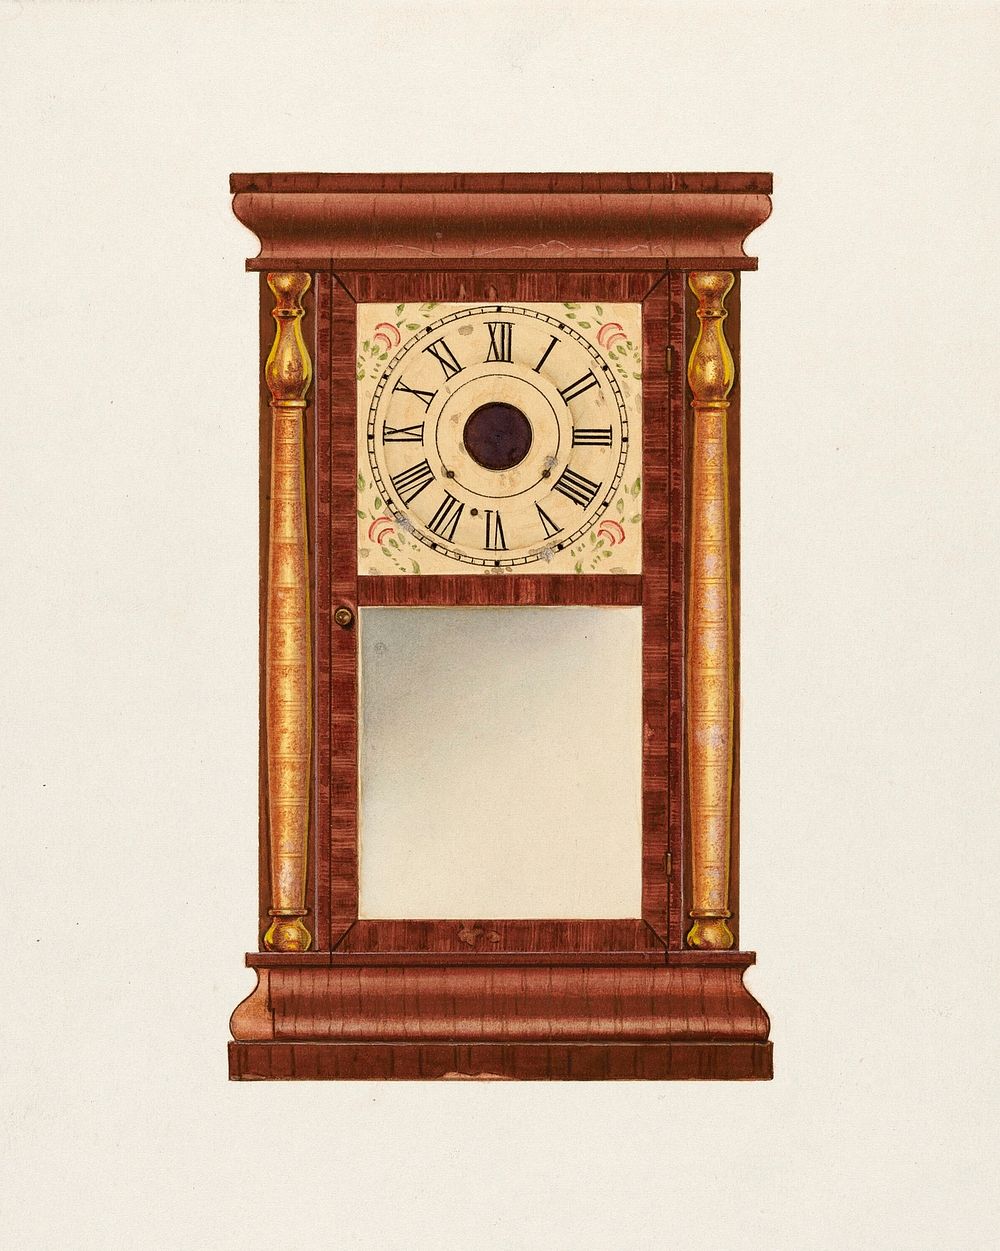 Mantle Clock (ca.1937) by Lon Cronk. Original from The National Gallery of Art. Digitally enhanced by rawpixel.